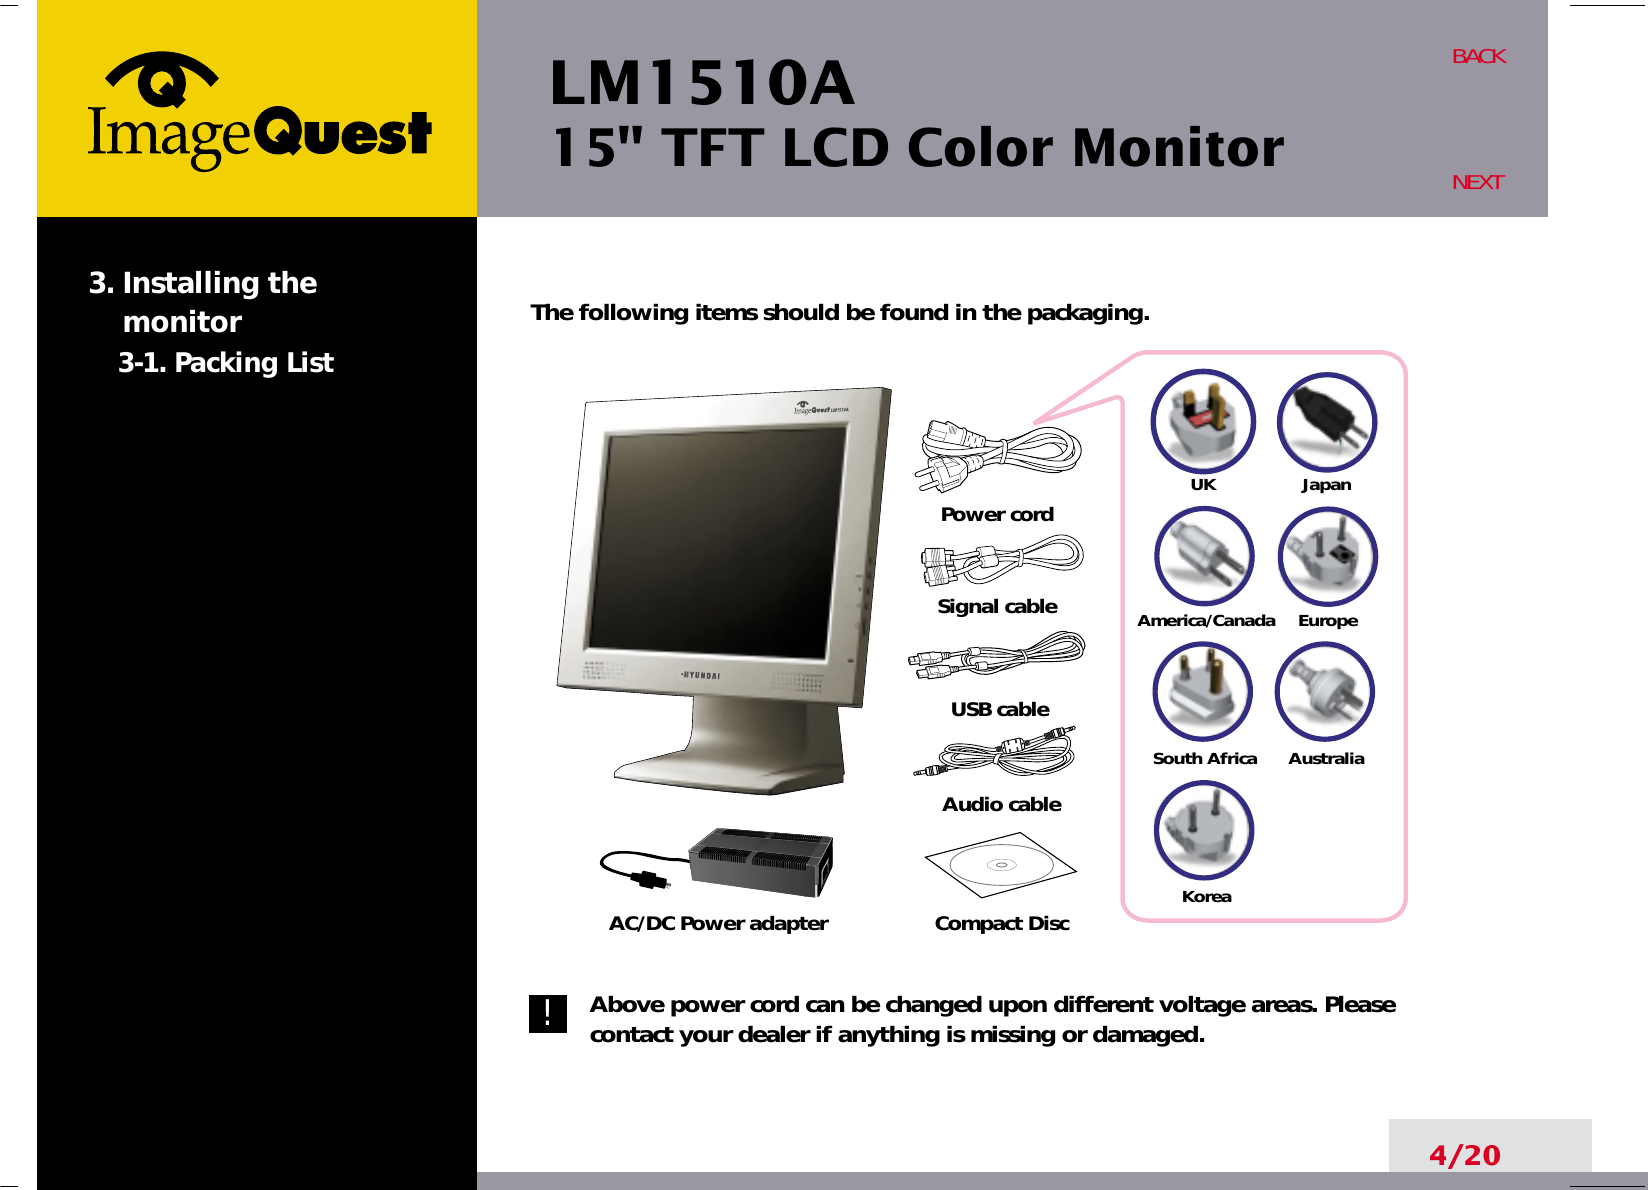 UKAmerica/CanadaJapanAustraliaKoreaEuropeSouth AfricaLM1510A15&quot; TFT LCD Color Monitor4/20BACKNEXTThe following items should be found in the packaging.Above power cord can be changed upon different voltage areas. Pleasecontact your dealer if anything is missing or damaged.3. Installing the monitor3-1. Packing List!Power cordSignal cableUSB cableAudio cableCompact DiscAC/DC Power adapter